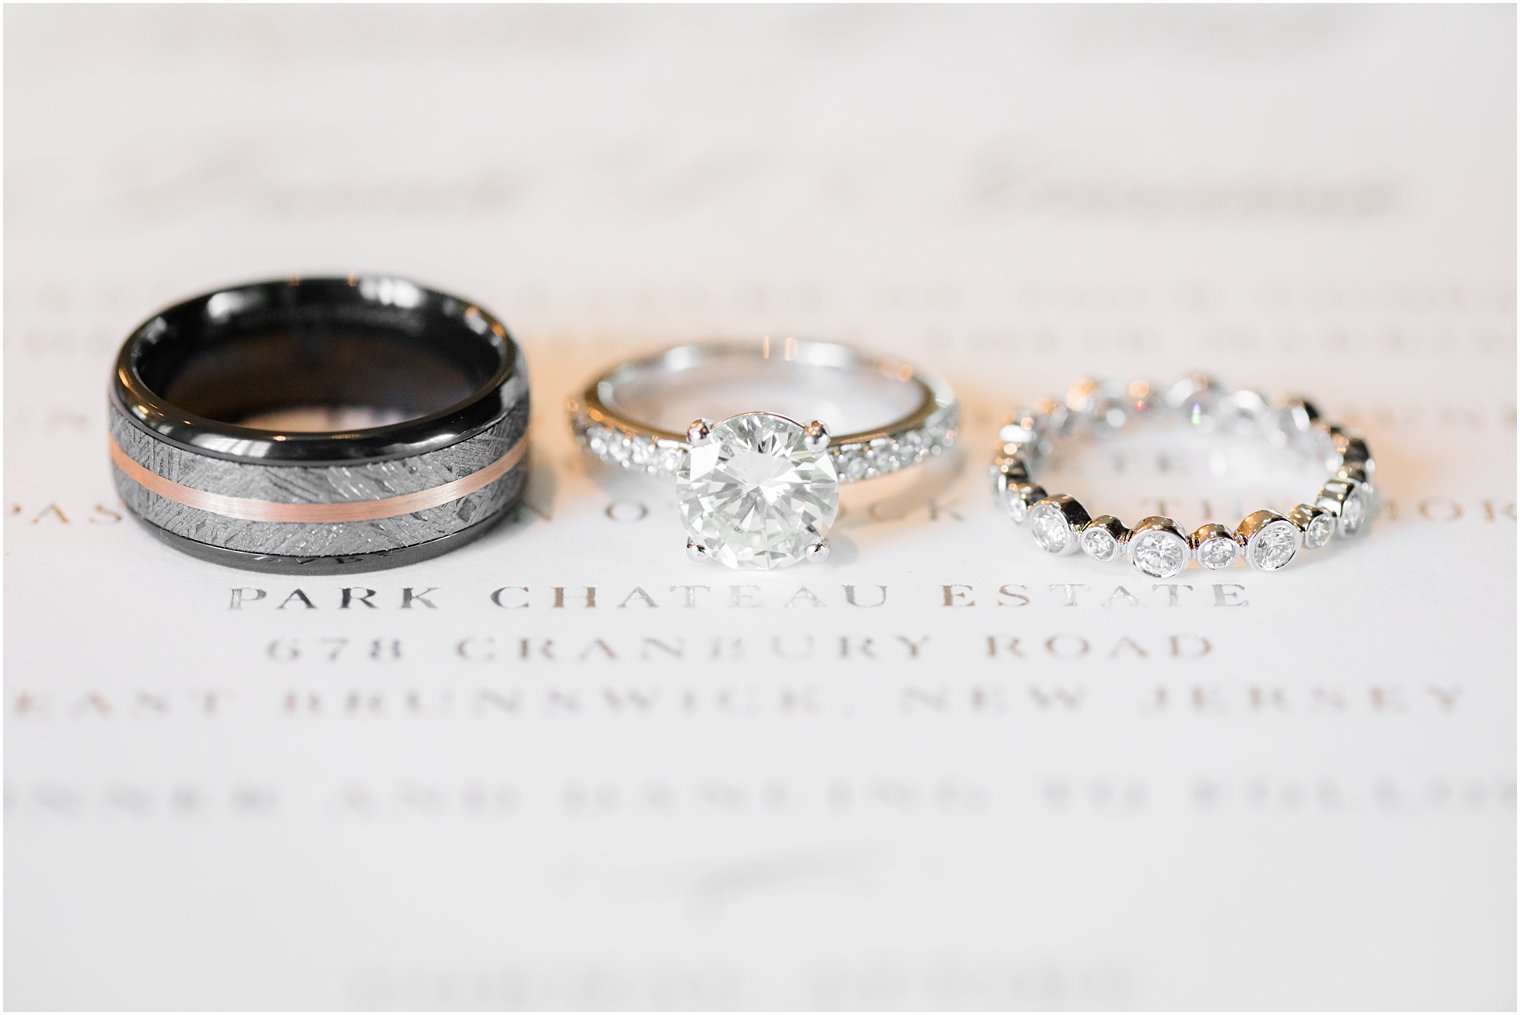 Wedding bands for a timeless and classic wedding